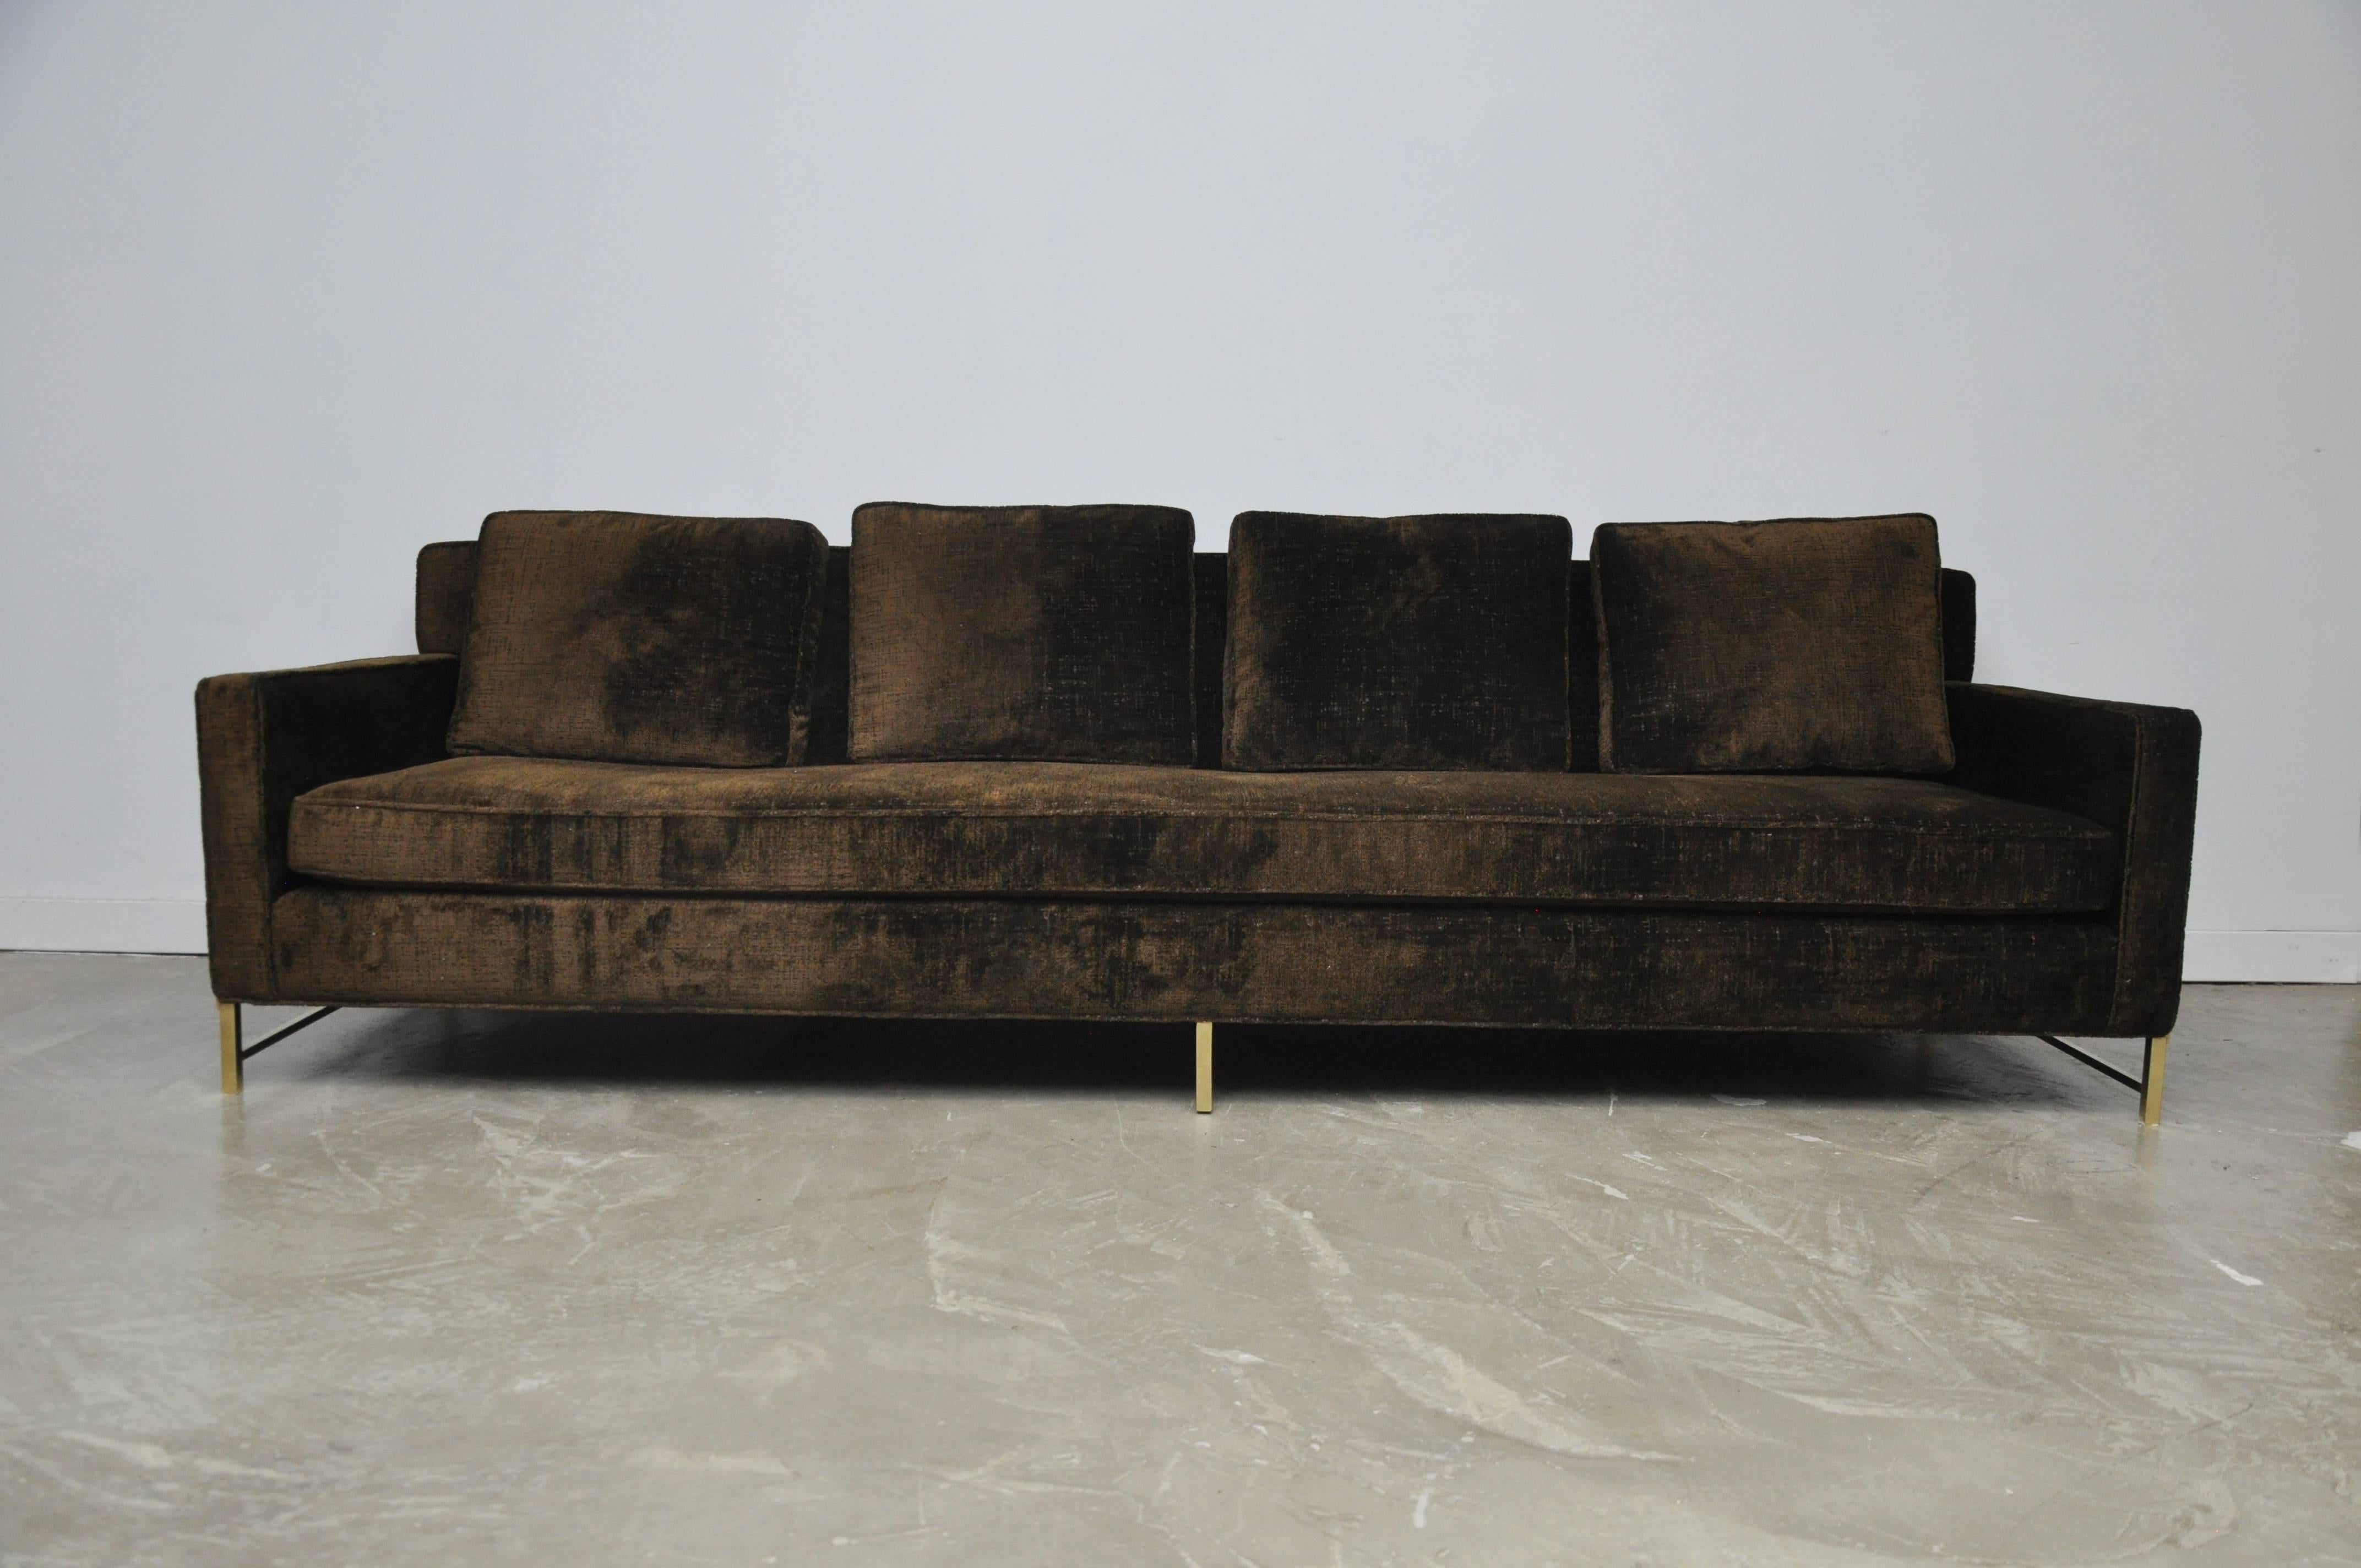 Sofa by Paul McCobb for Directional Furniture. Fully restored and reupholstered in Great Plaines textured velvet over polished brass stretcher bases.